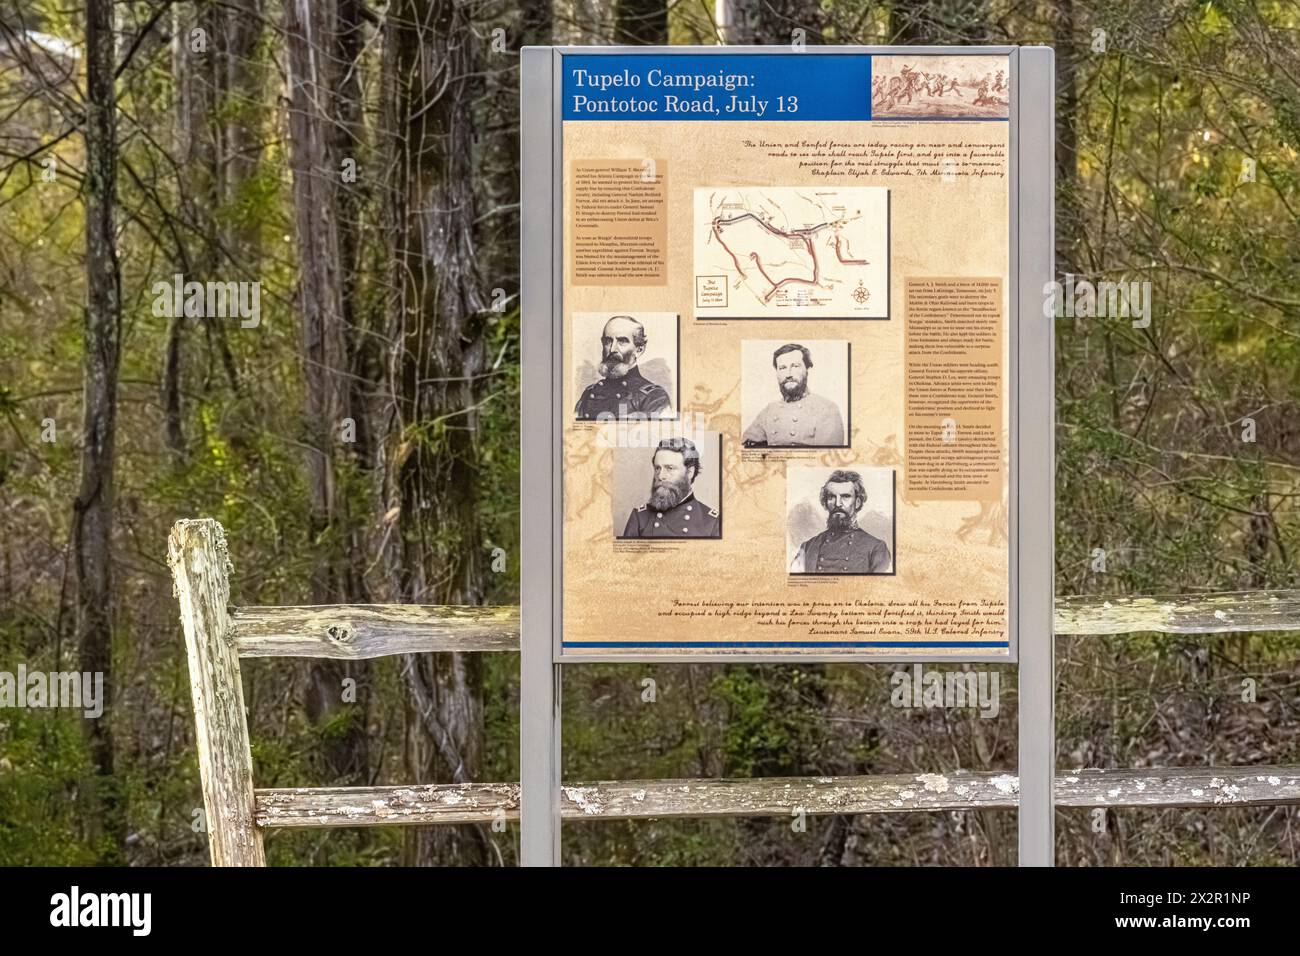 Historical marker sign for the American Civil War battle during the Tupelo Campaign at Potontac Road on July 13, 1864. (USA) Stock Photo